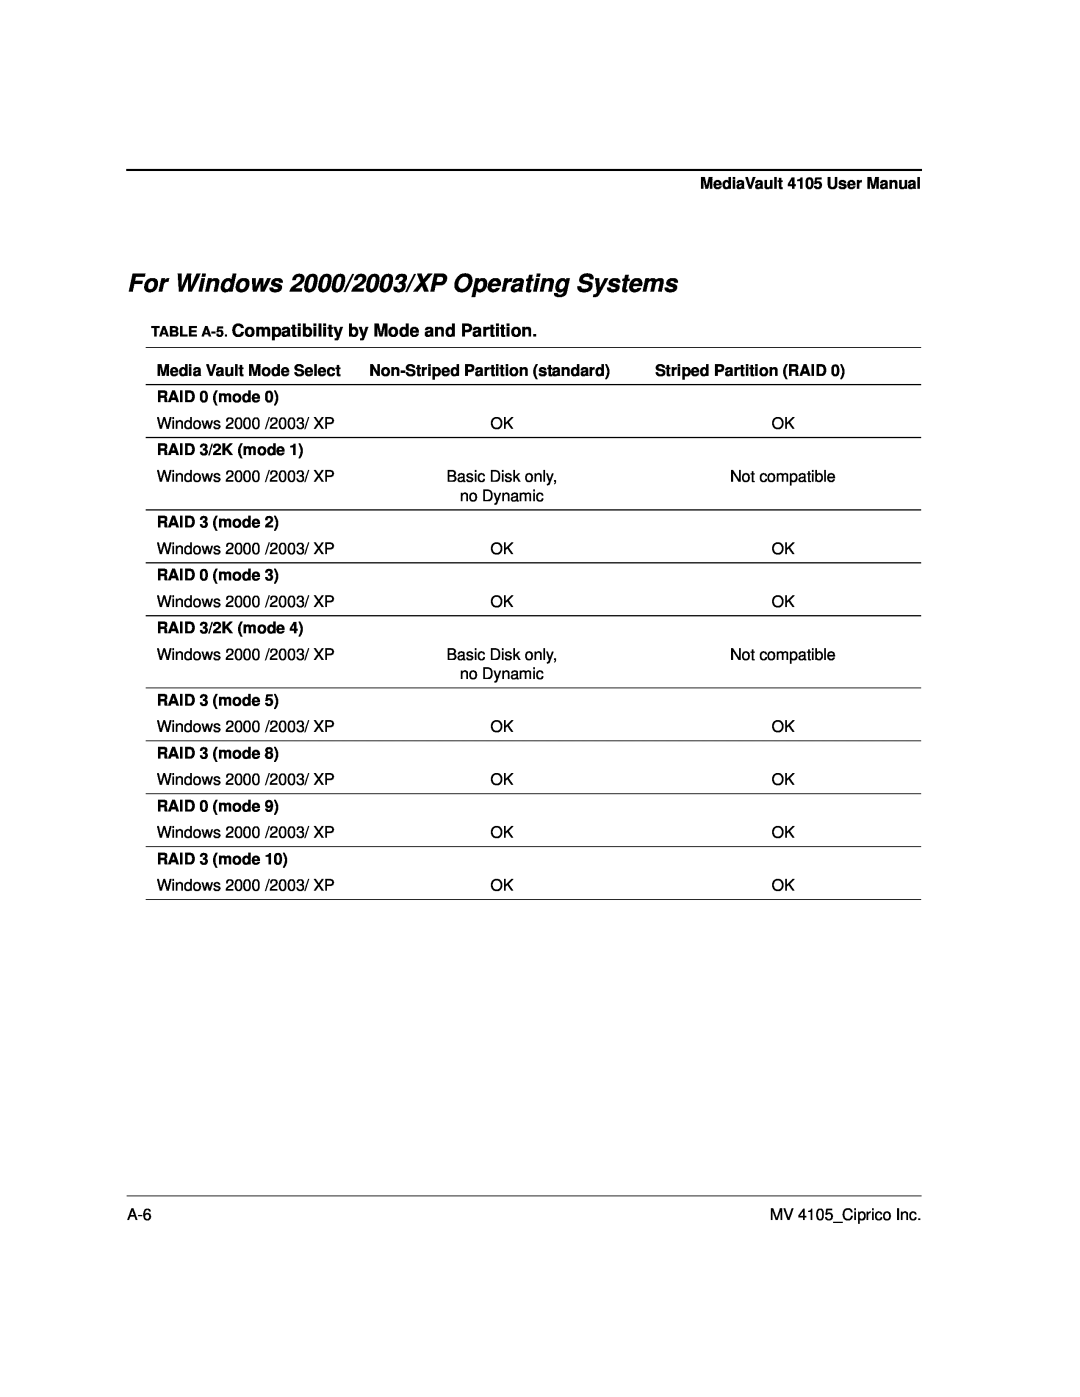 Ciprico 4105 Series user manual For Windows 2000/2003/XP Operating Systems, TABLE A-5. Compatibility by Mode and Partition 